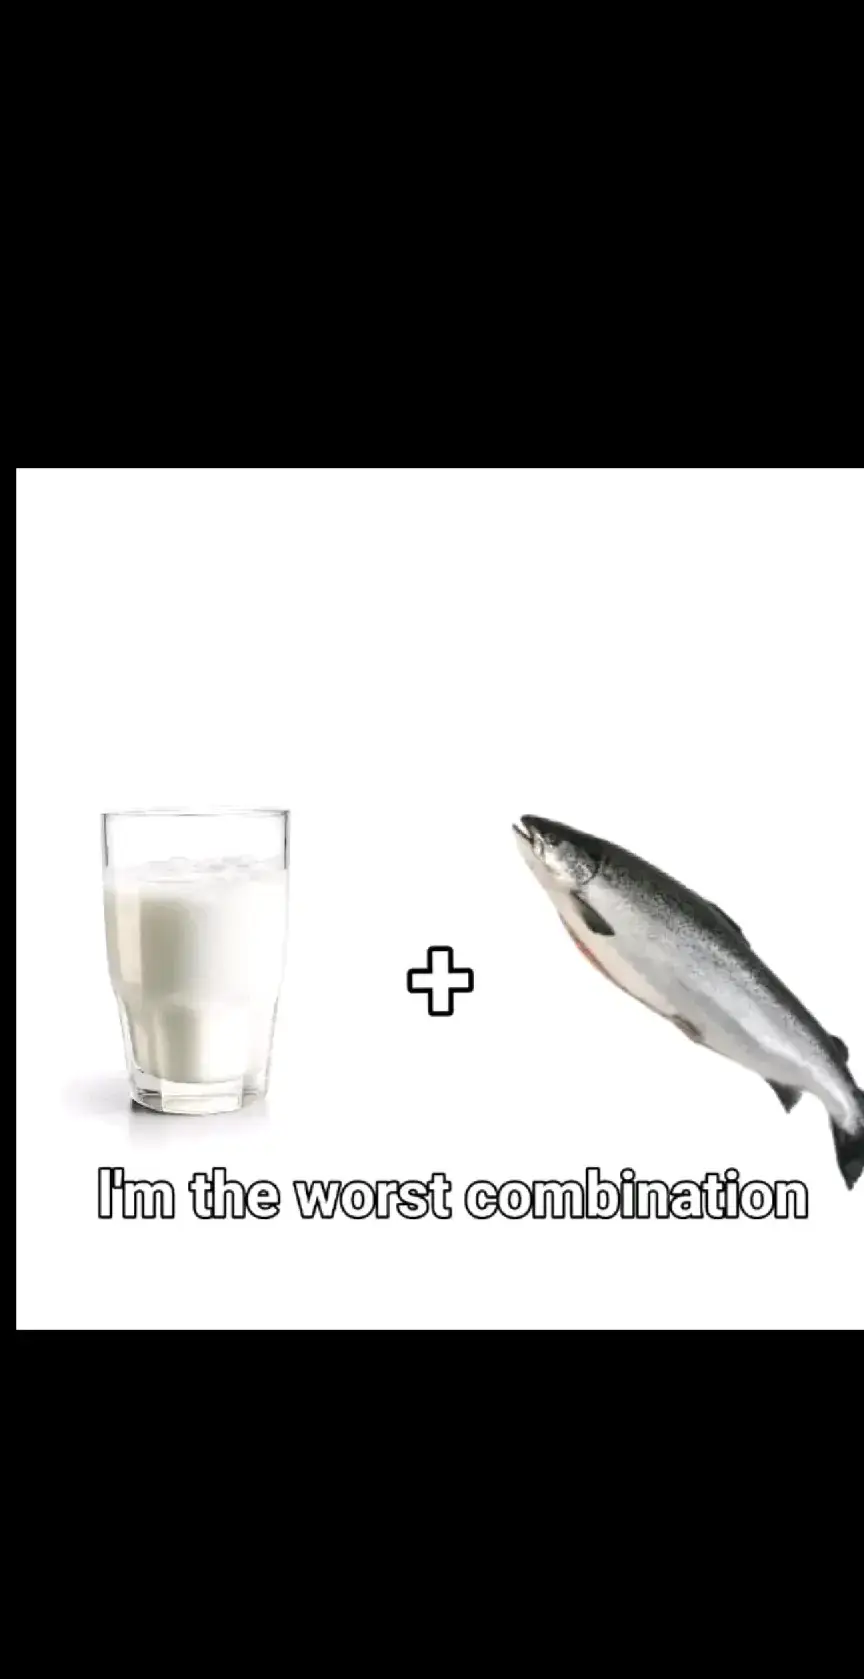 #fyp #viral #worst #combination 